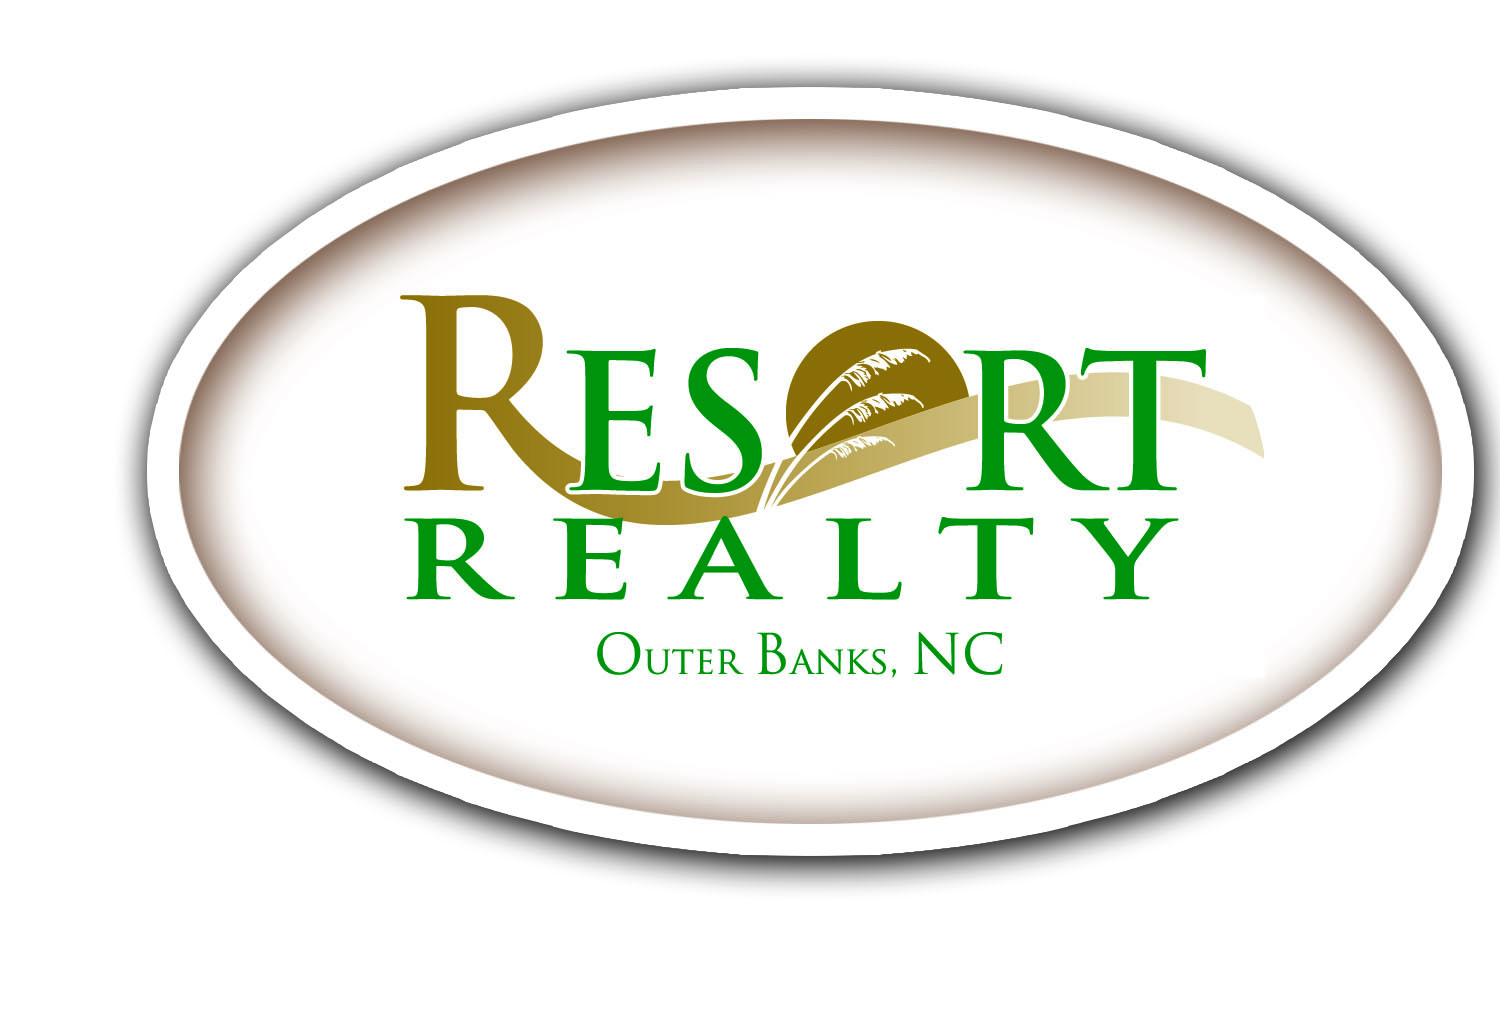 Resort Realty, Outer Banks, NC